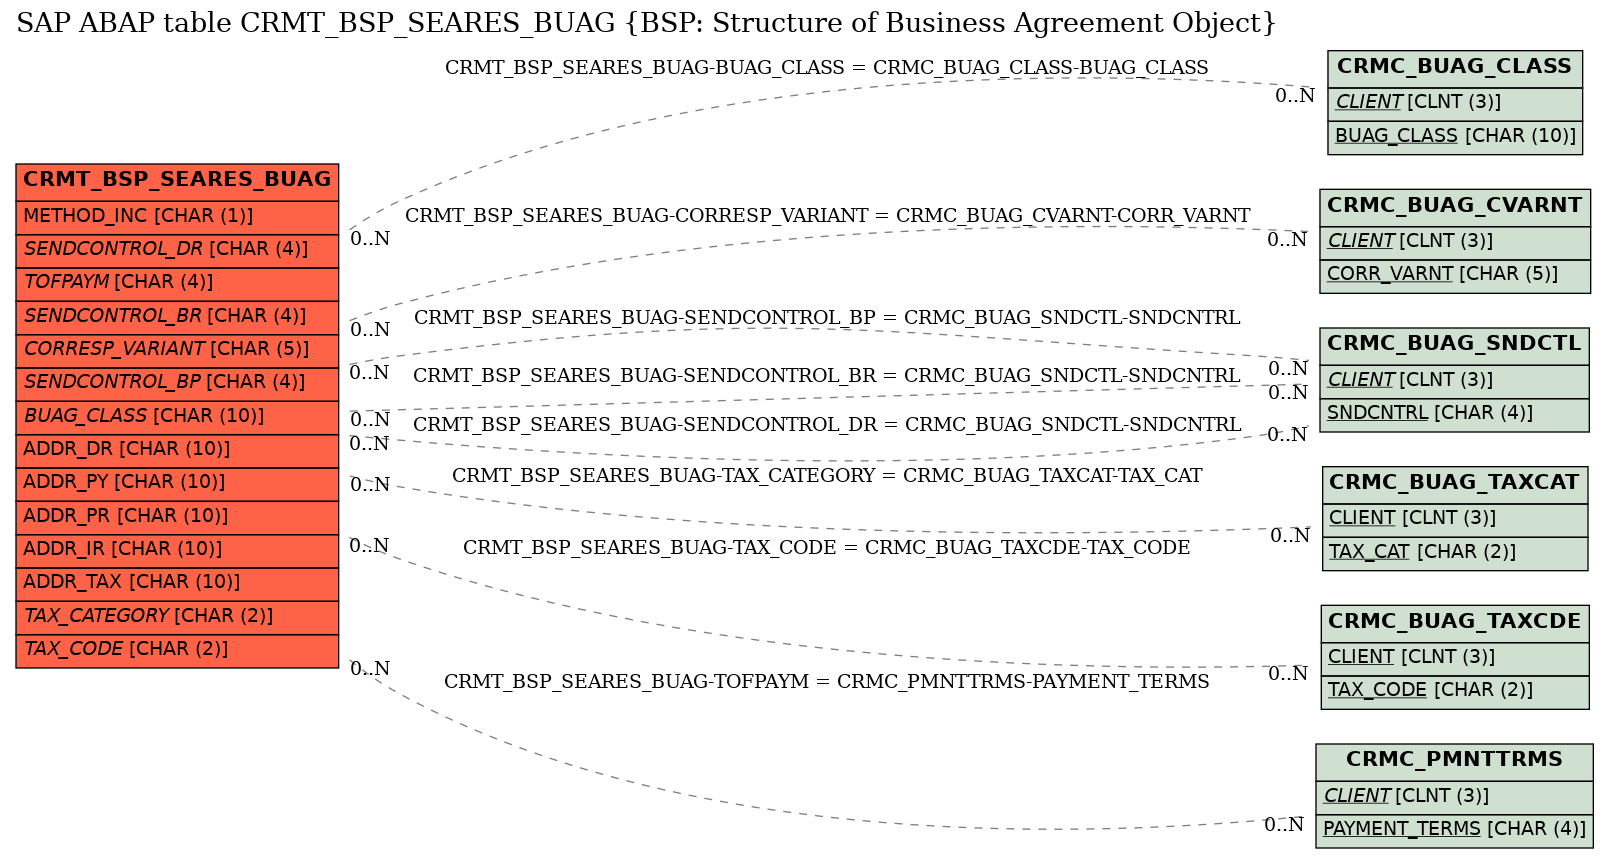 E-R Diagram for table CRMT_BSP_SEARES_BUAG (BSP: Structure of Business Agreement Object)